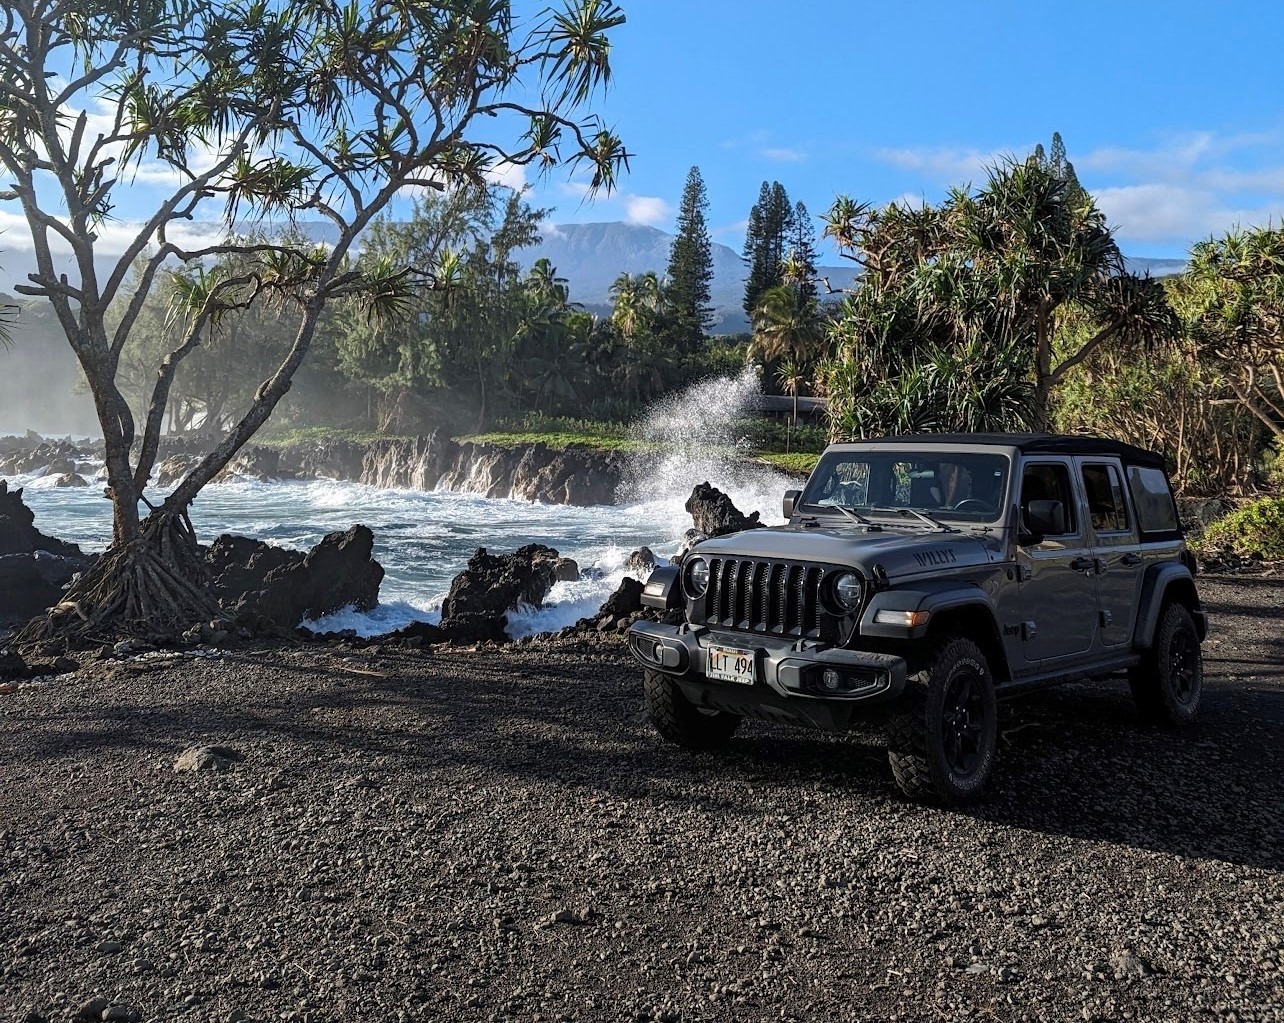 Product Road To Hana Guided Jeep Tour